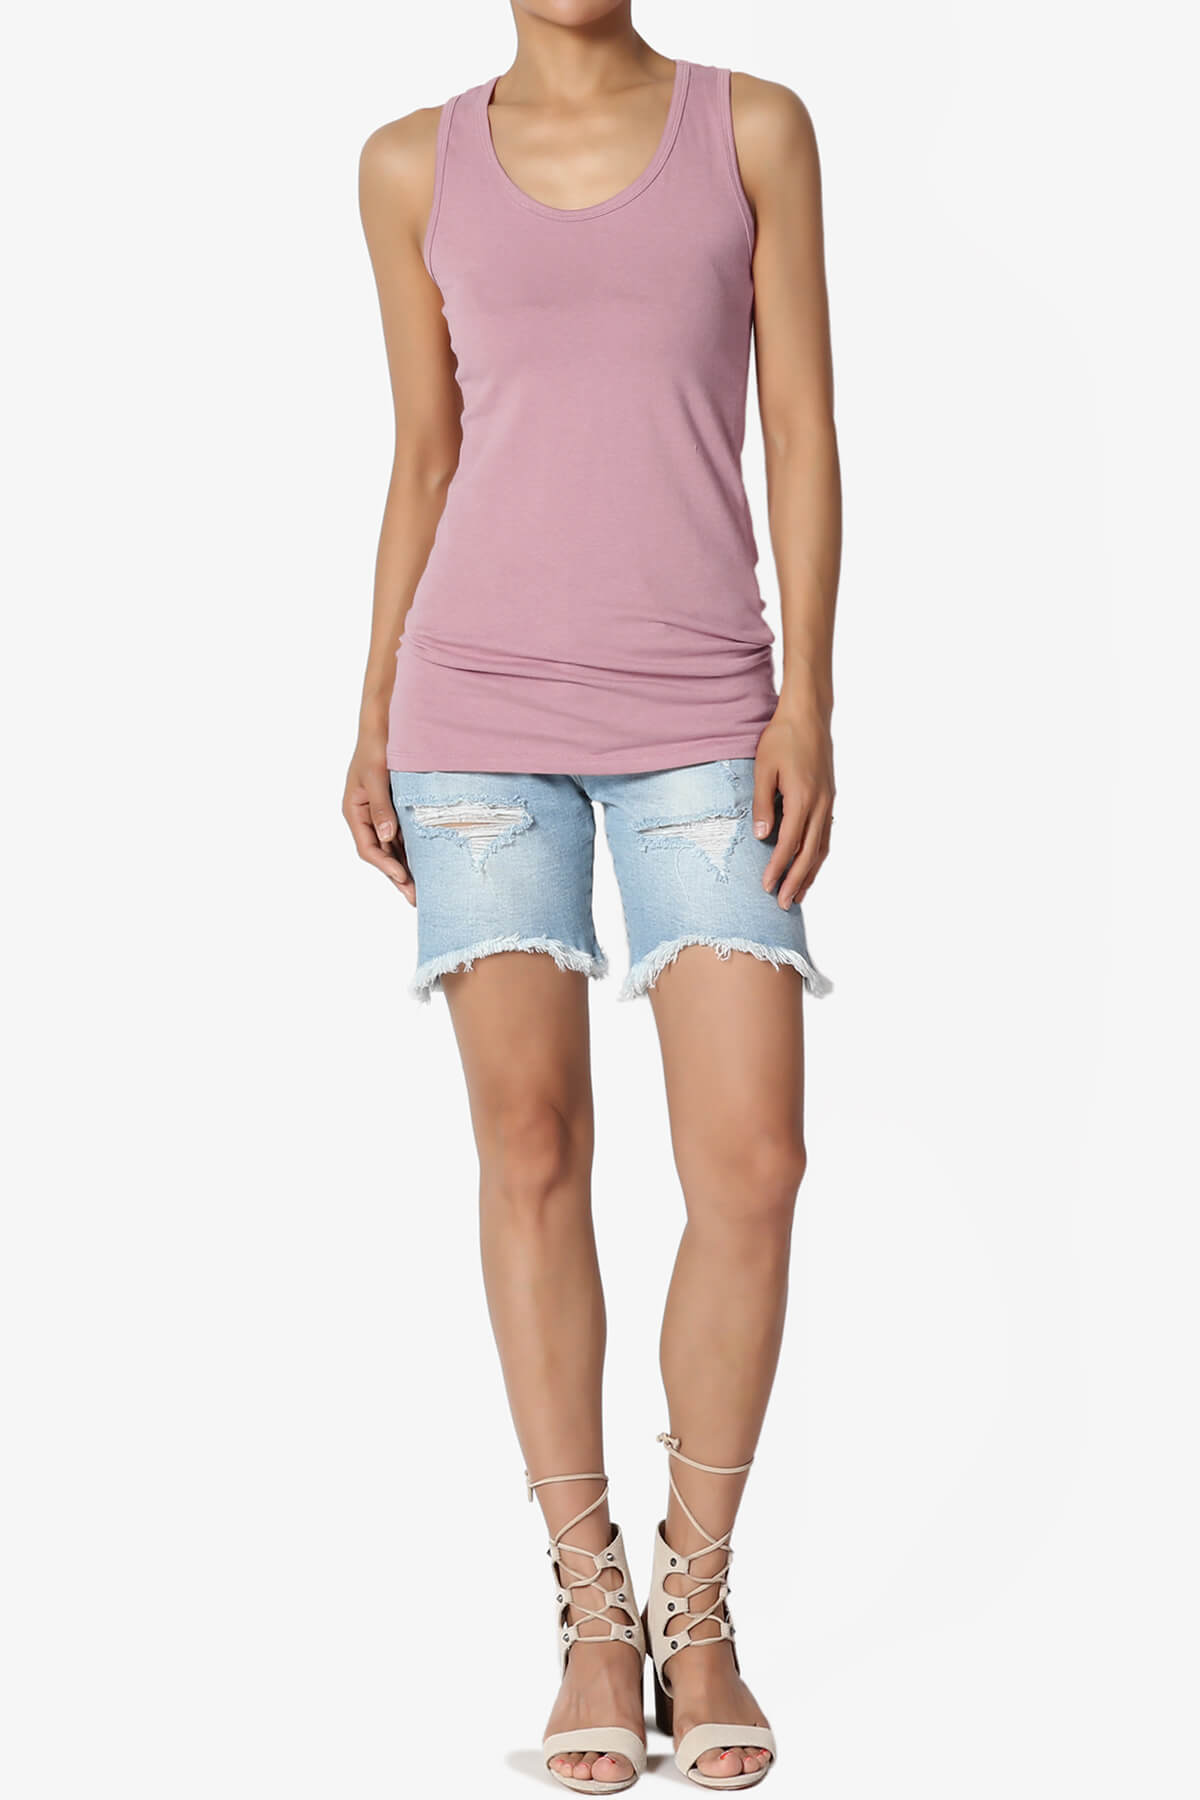 Load image into Gallery viewer, Marnie Racerback Tank Top LIGHT ROSE_6
